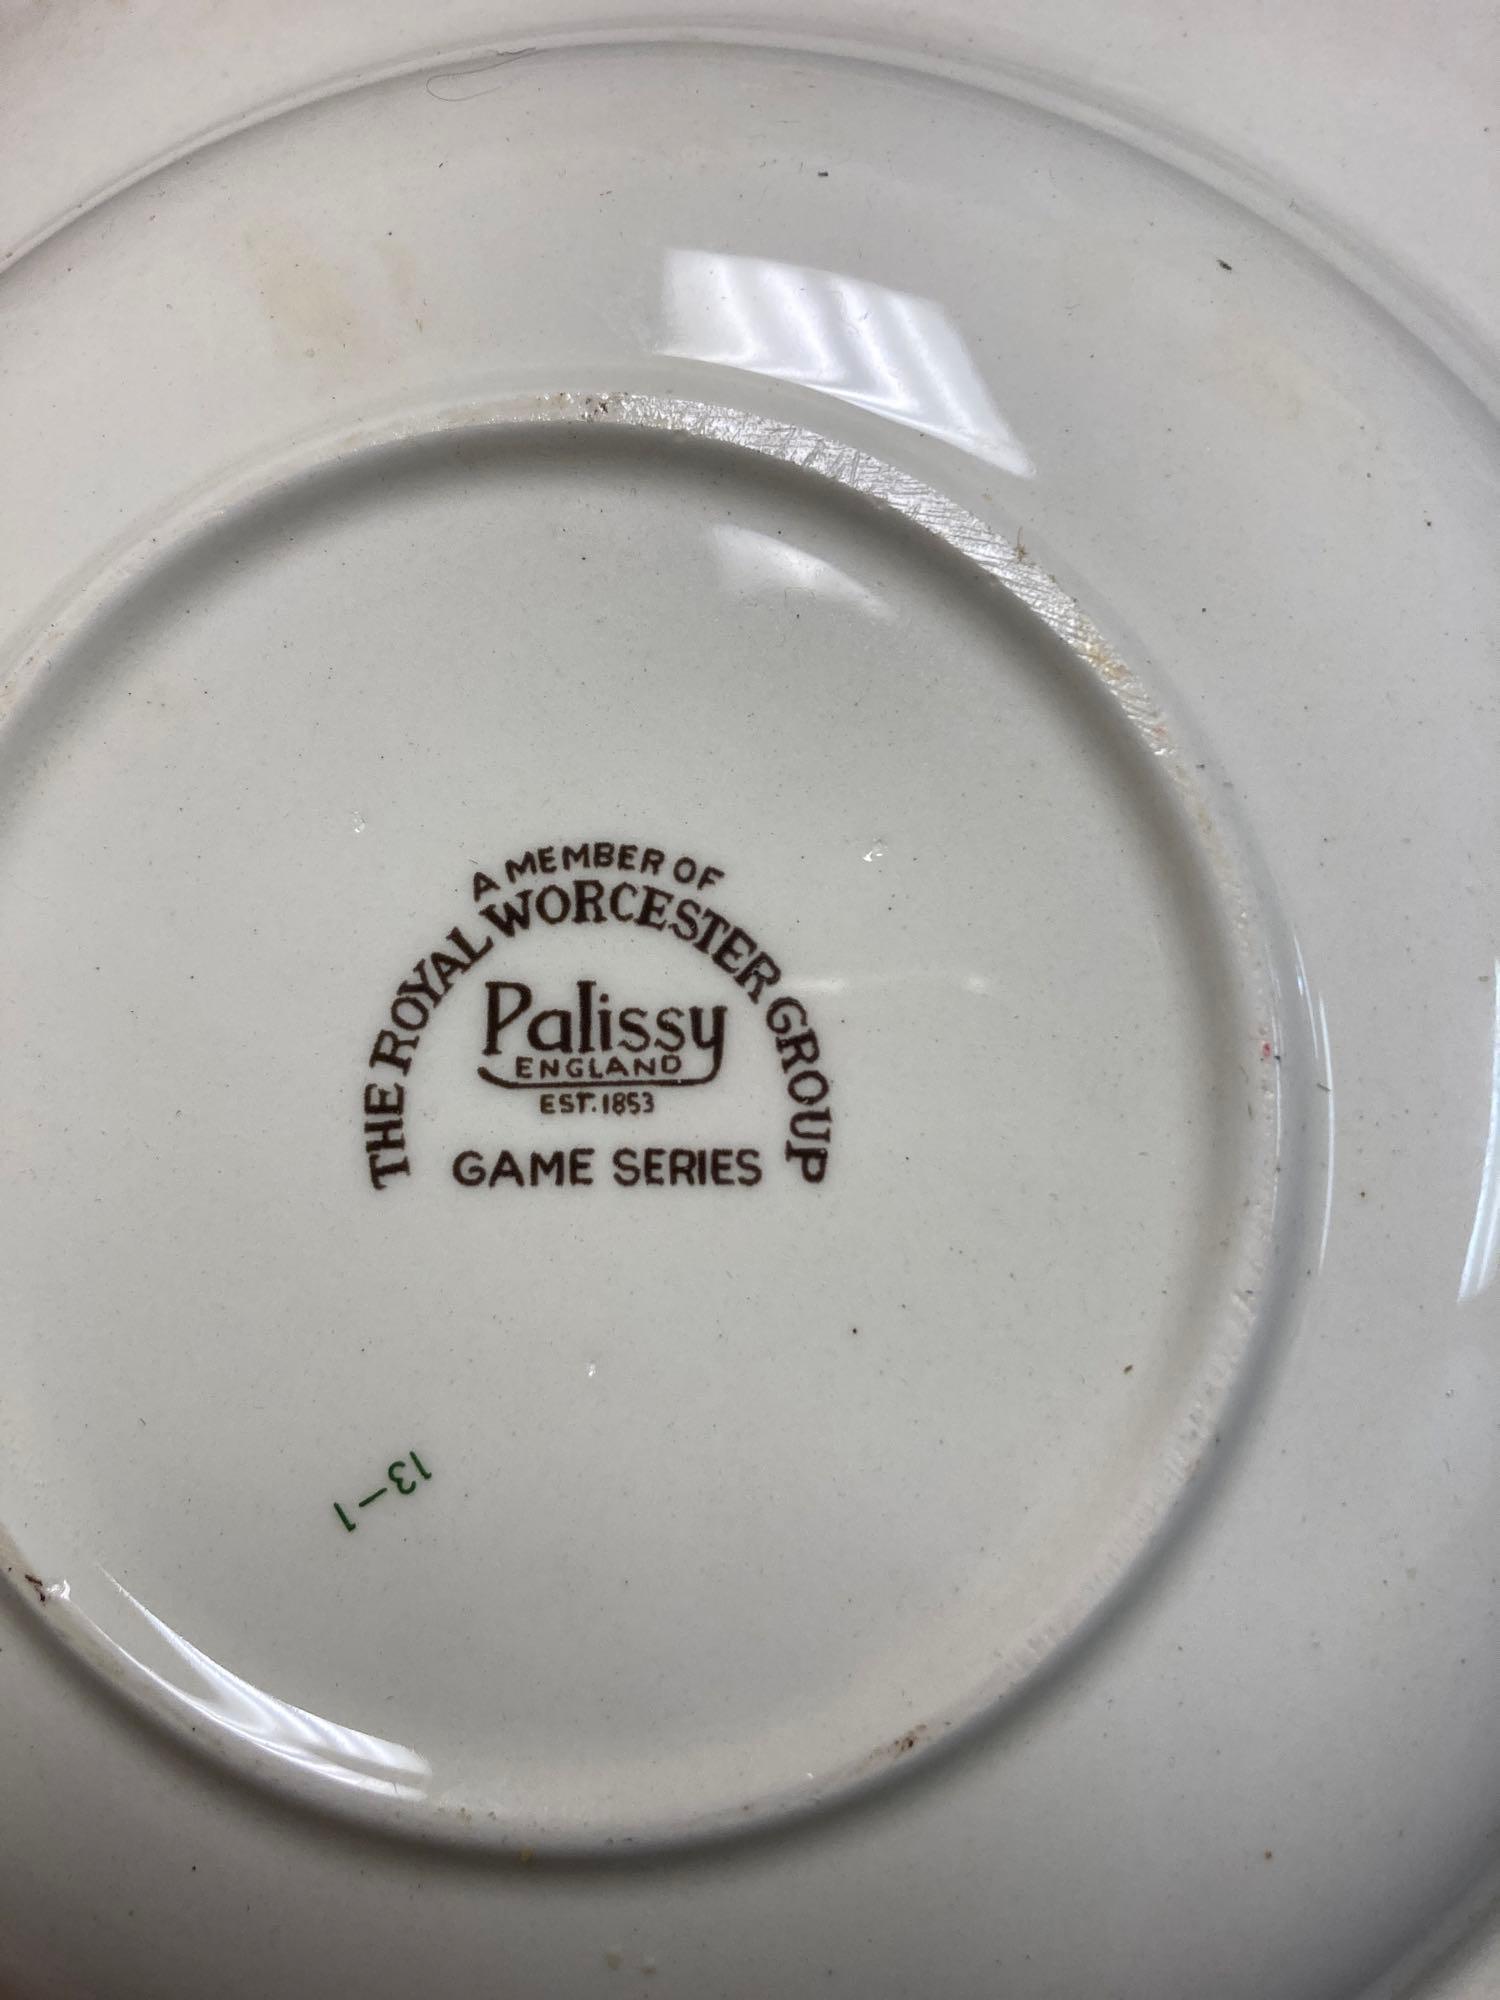 Vintage plates and bowls